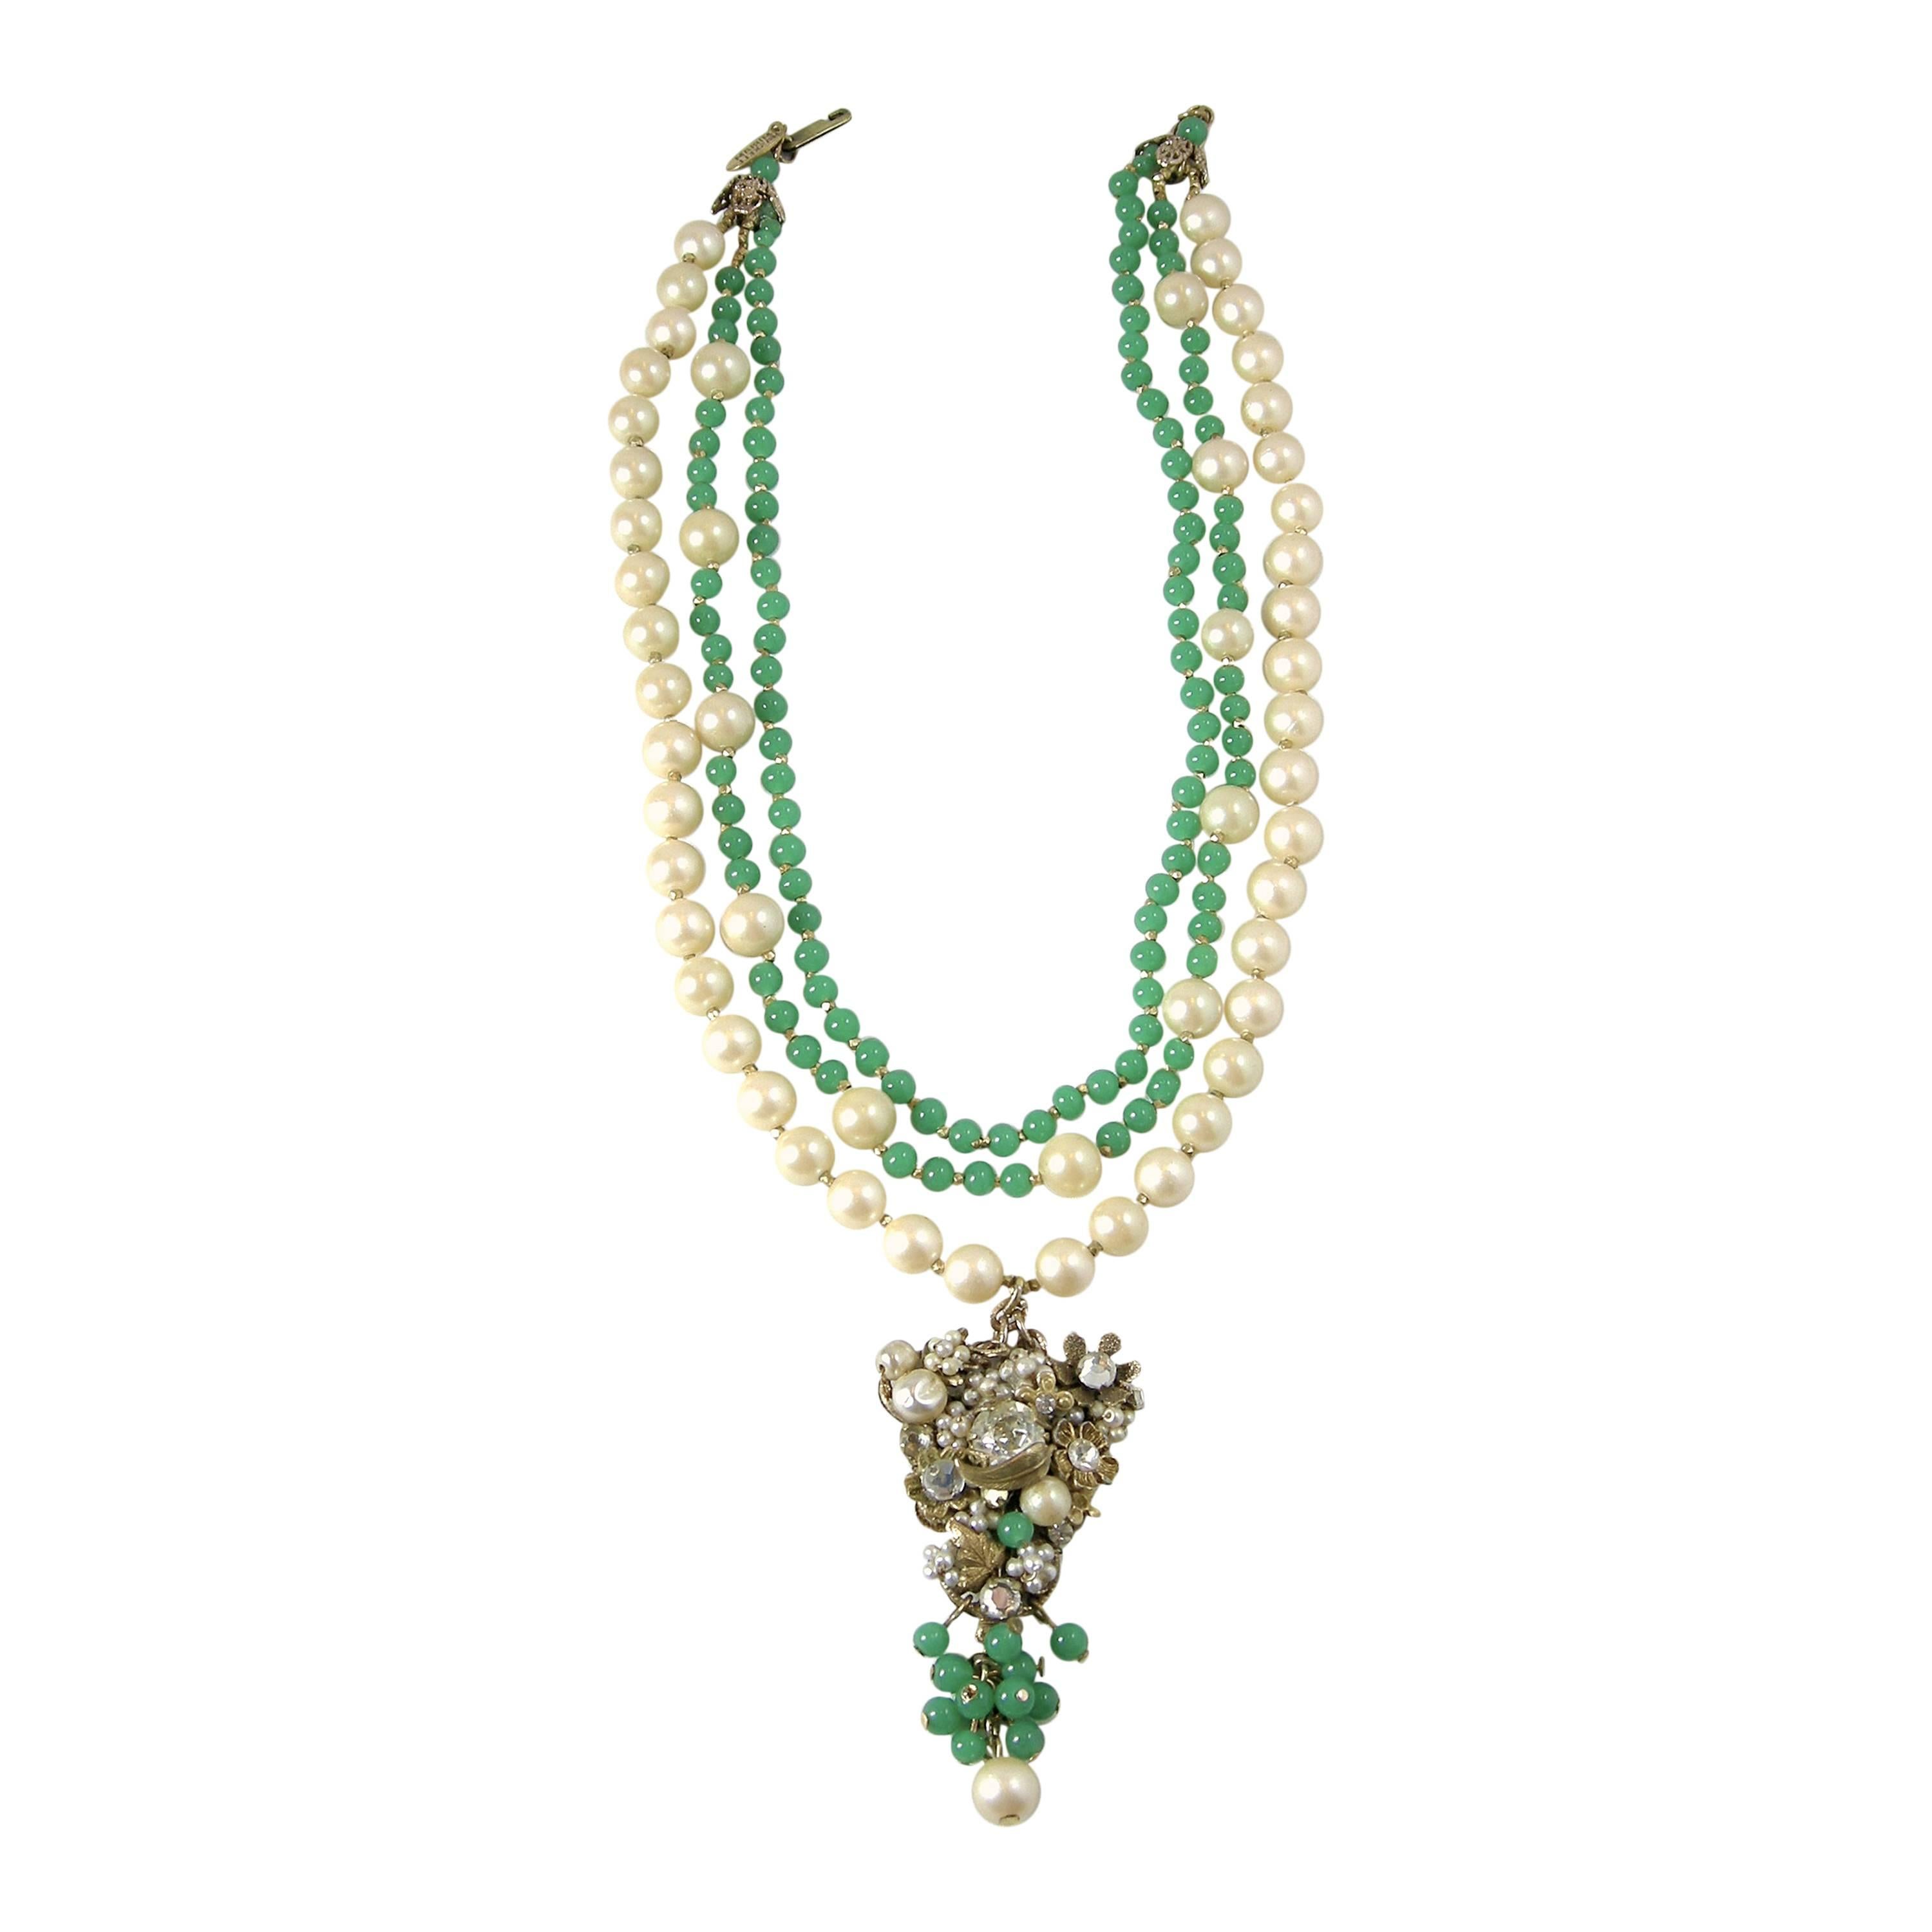 Vintage Signed Miriam Haskell 3-Strand Faux Pearl & Green Glass Bead Necklace For Sale